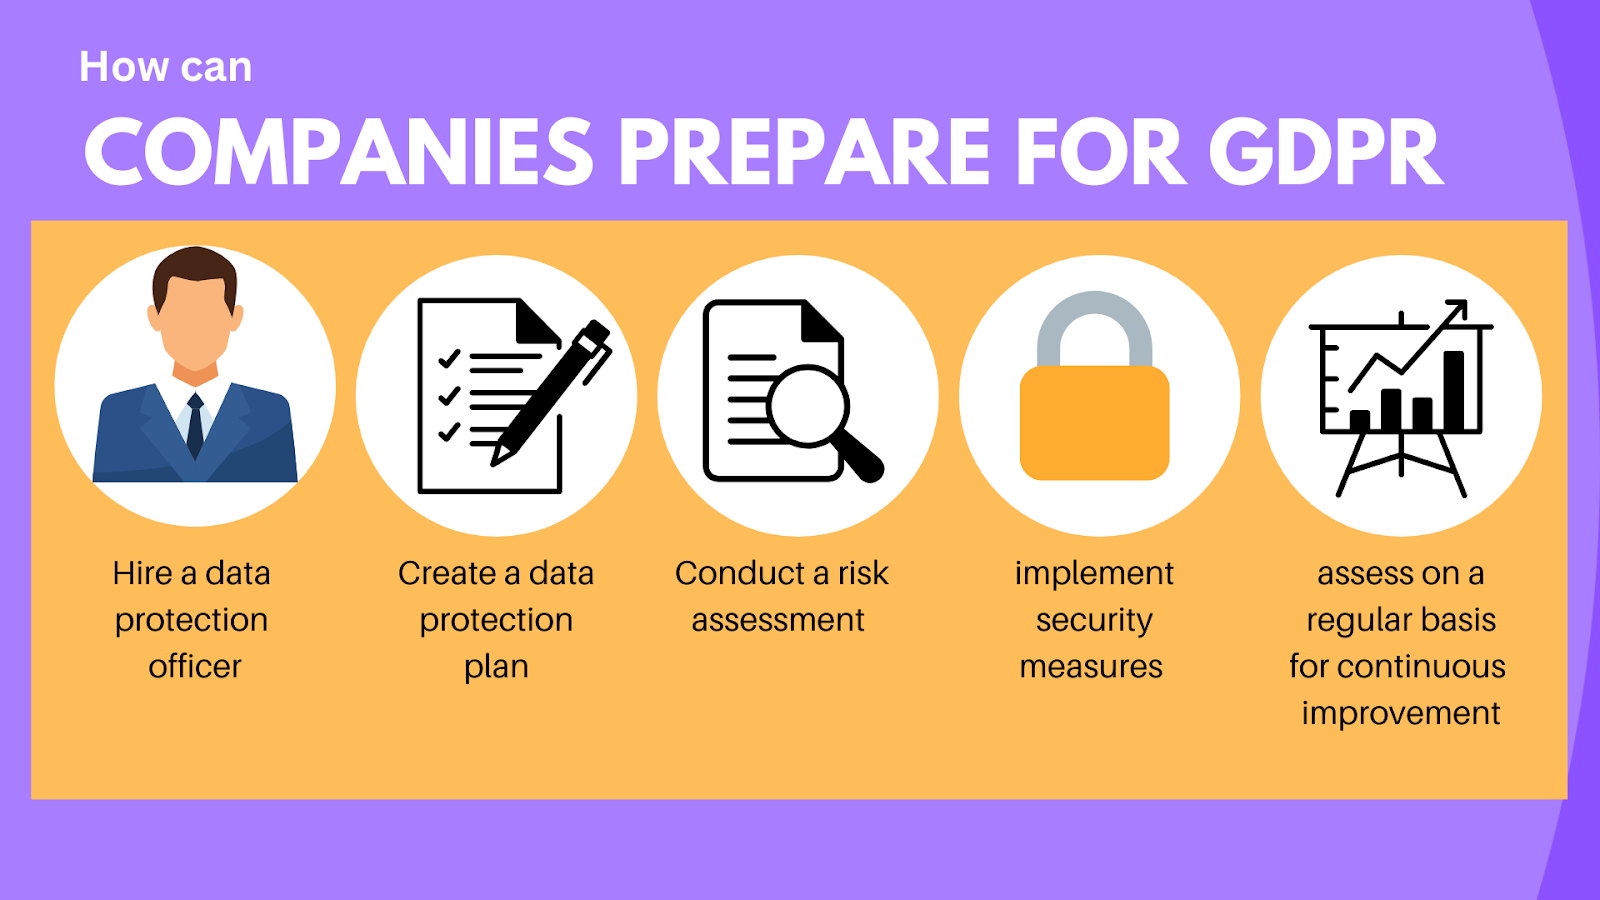 how can companies prepare for GDPR